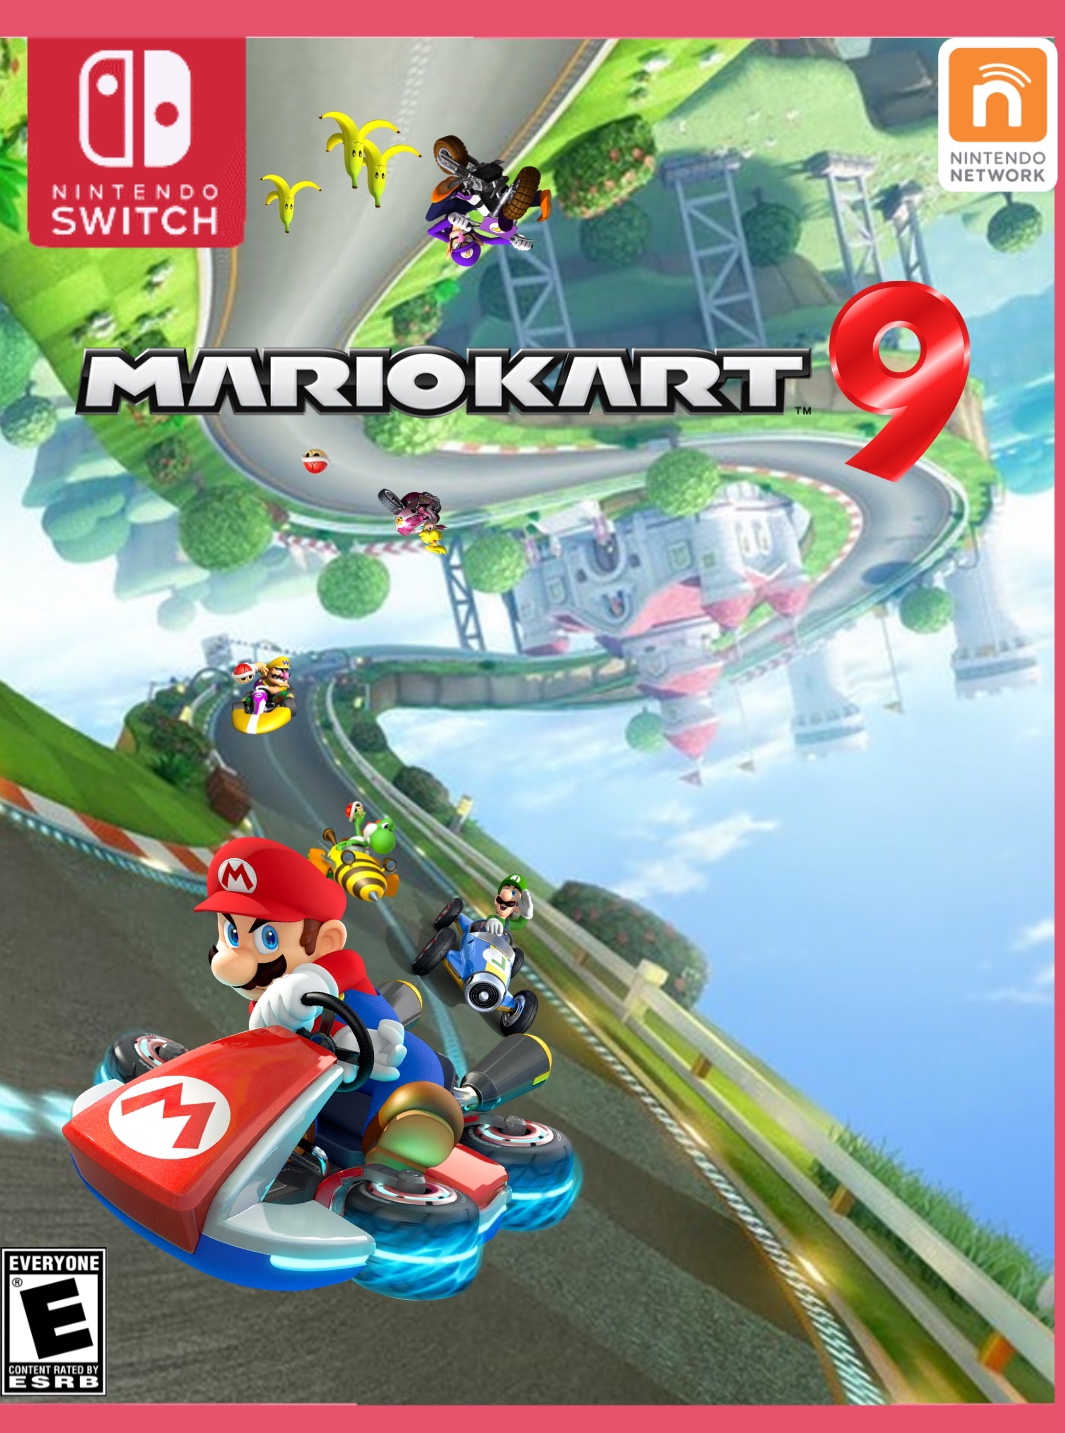 when does mario kart 9 come out